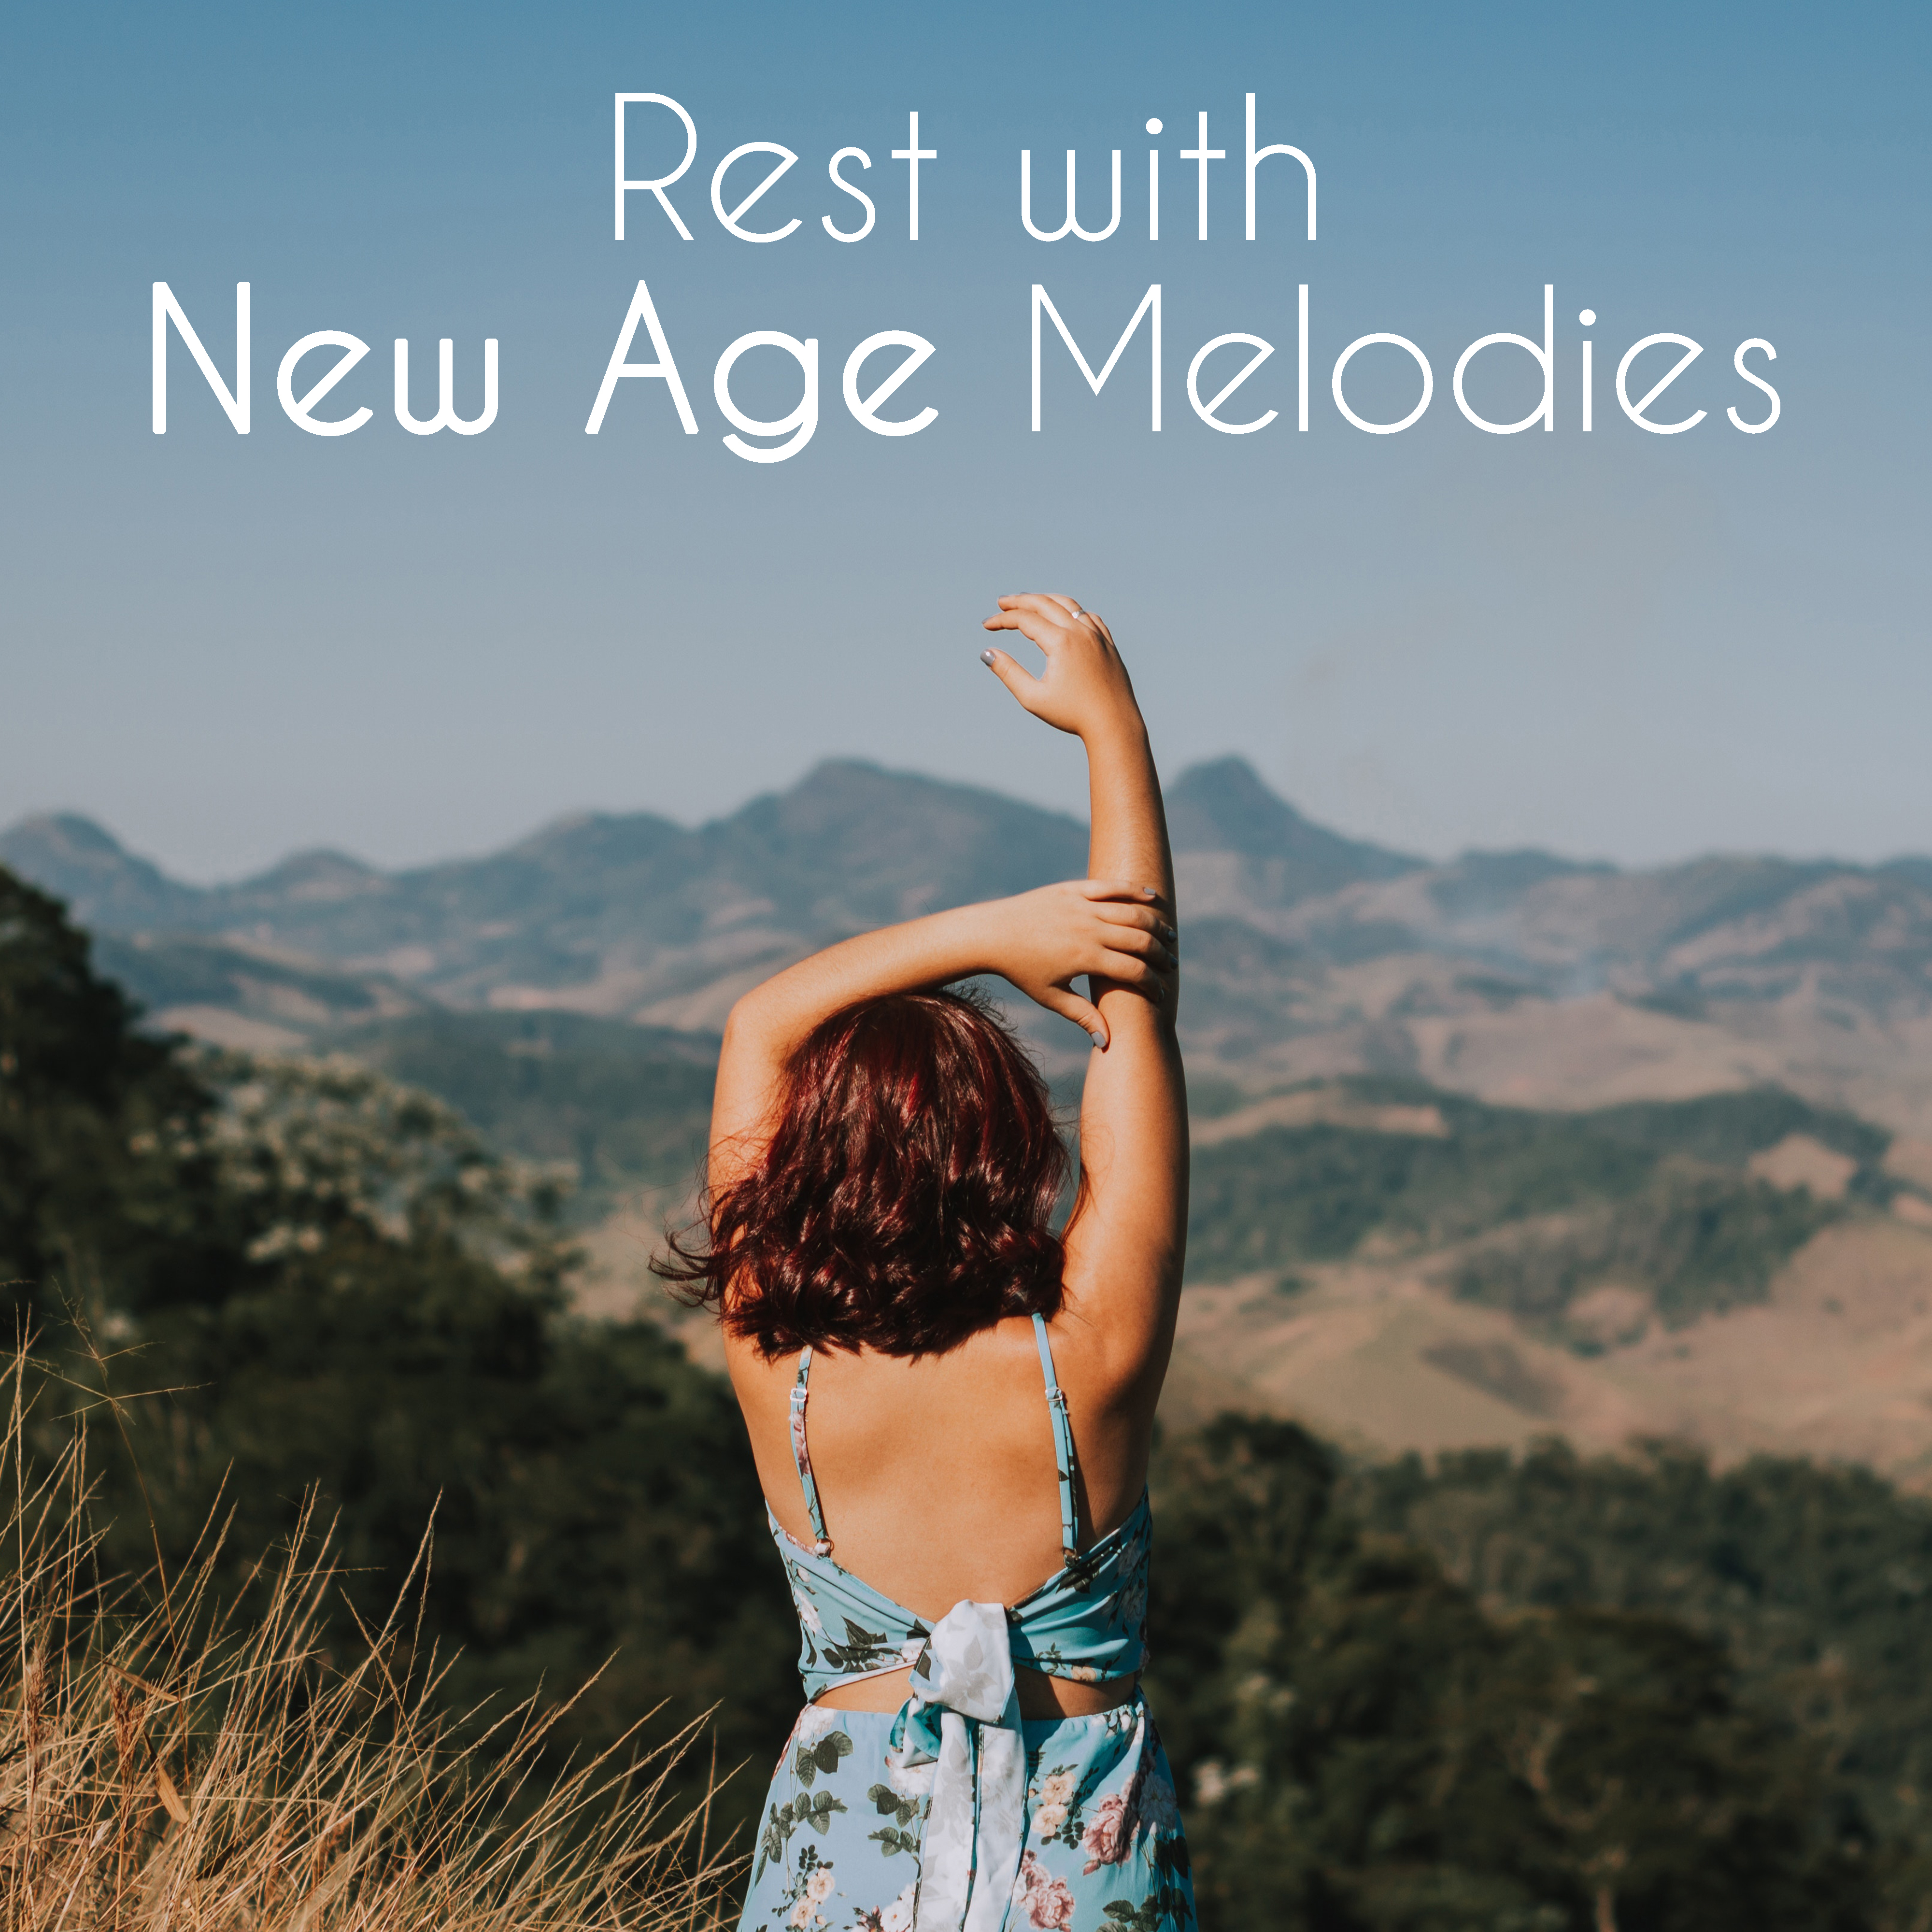 Rest with New Age Melodies